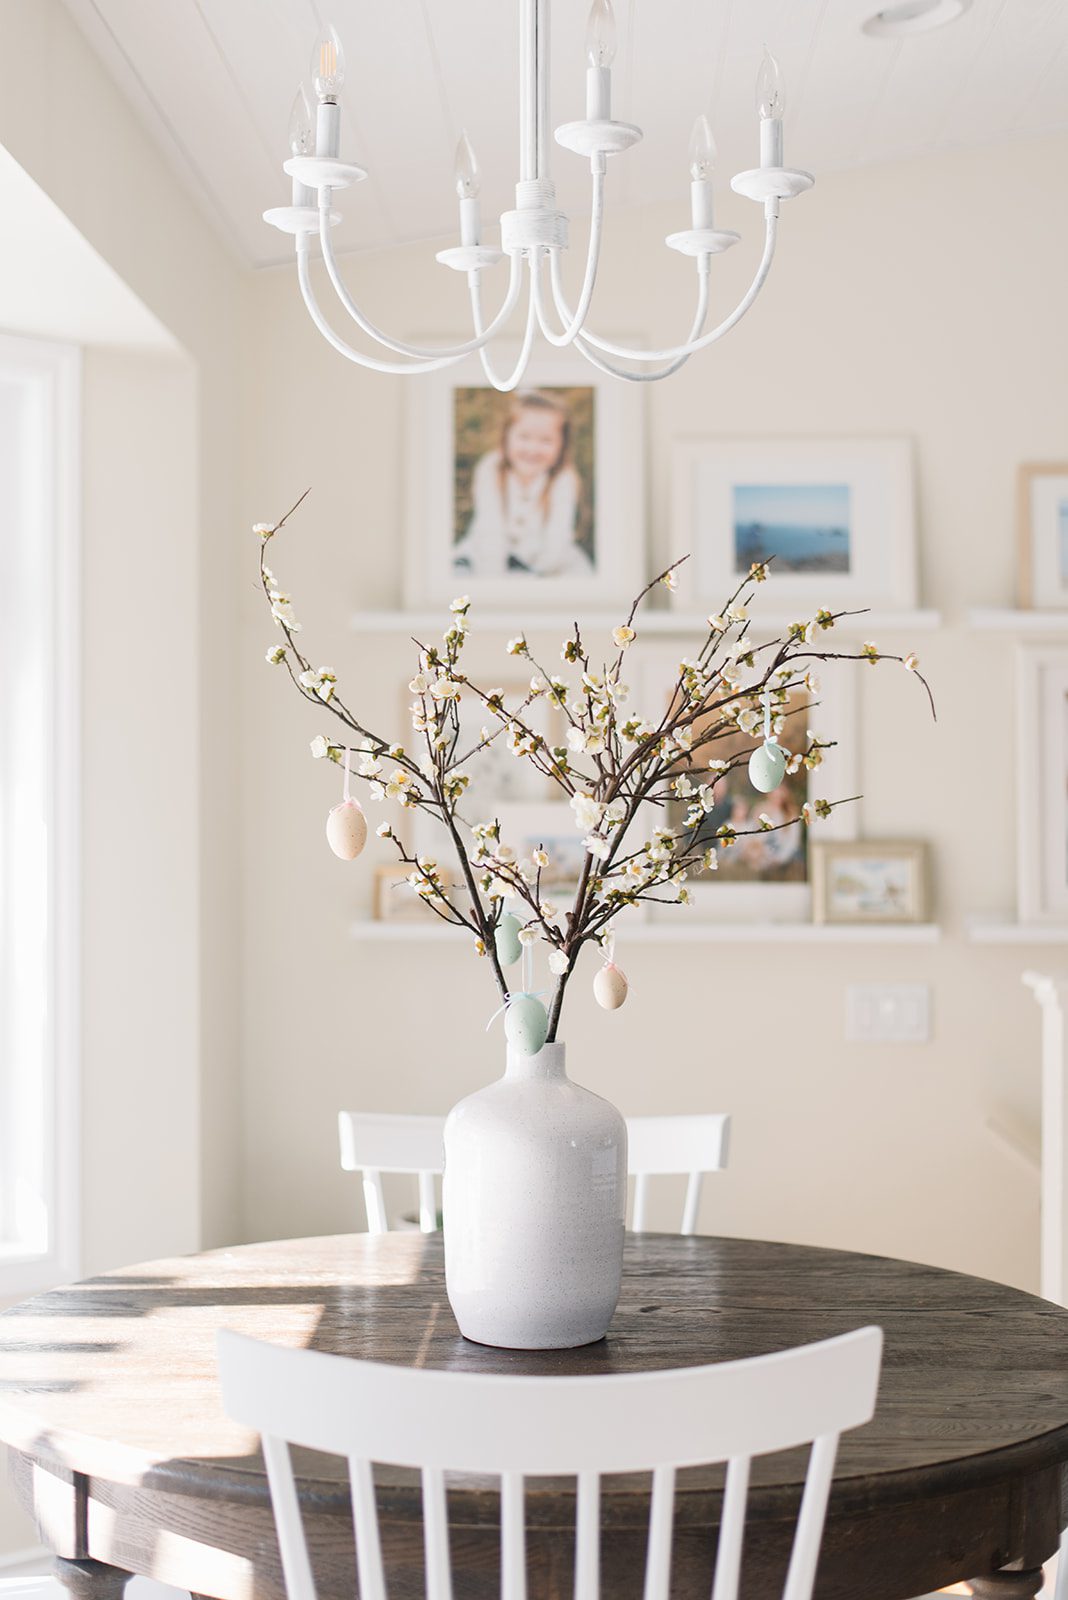 A vase of pussy willows with Easter eggs hung on the branches